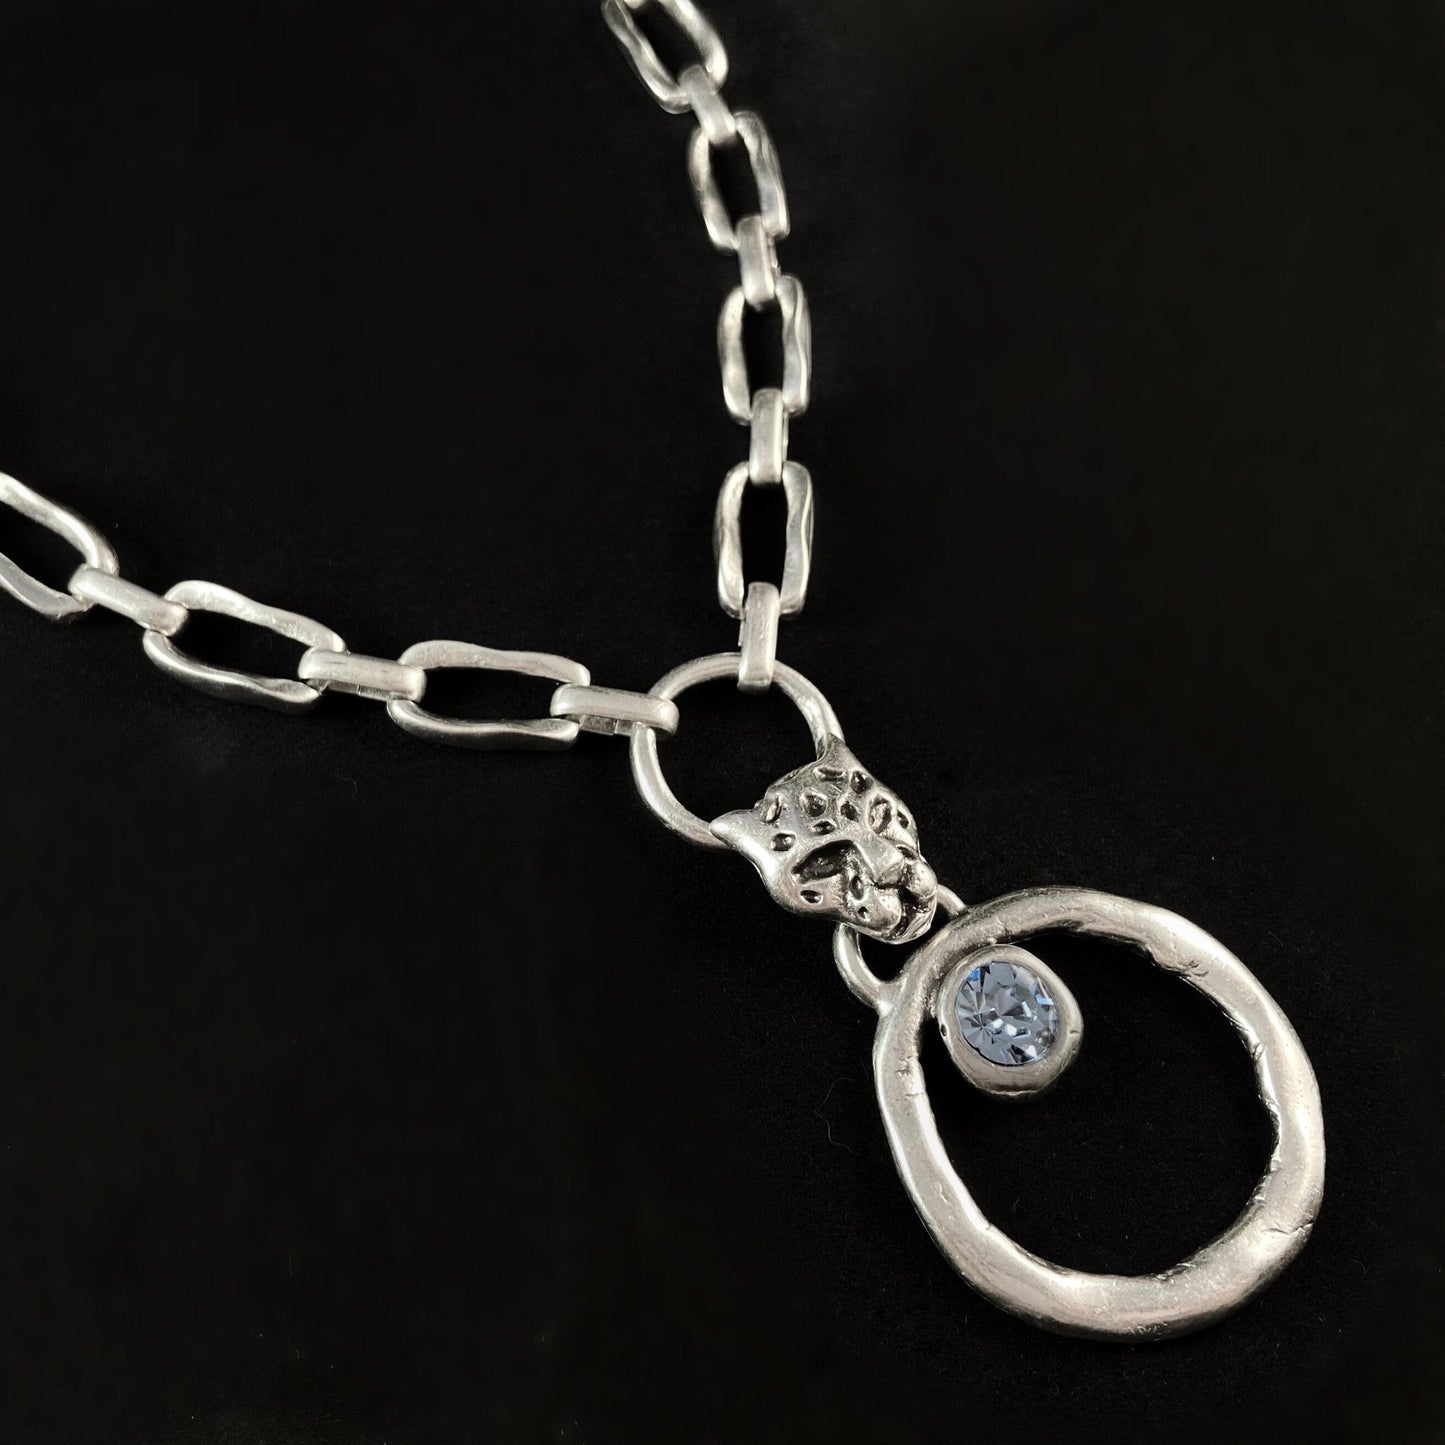 Long Silver Chain Link Necklace with Blue Crystal, Handmade, Nickel Free